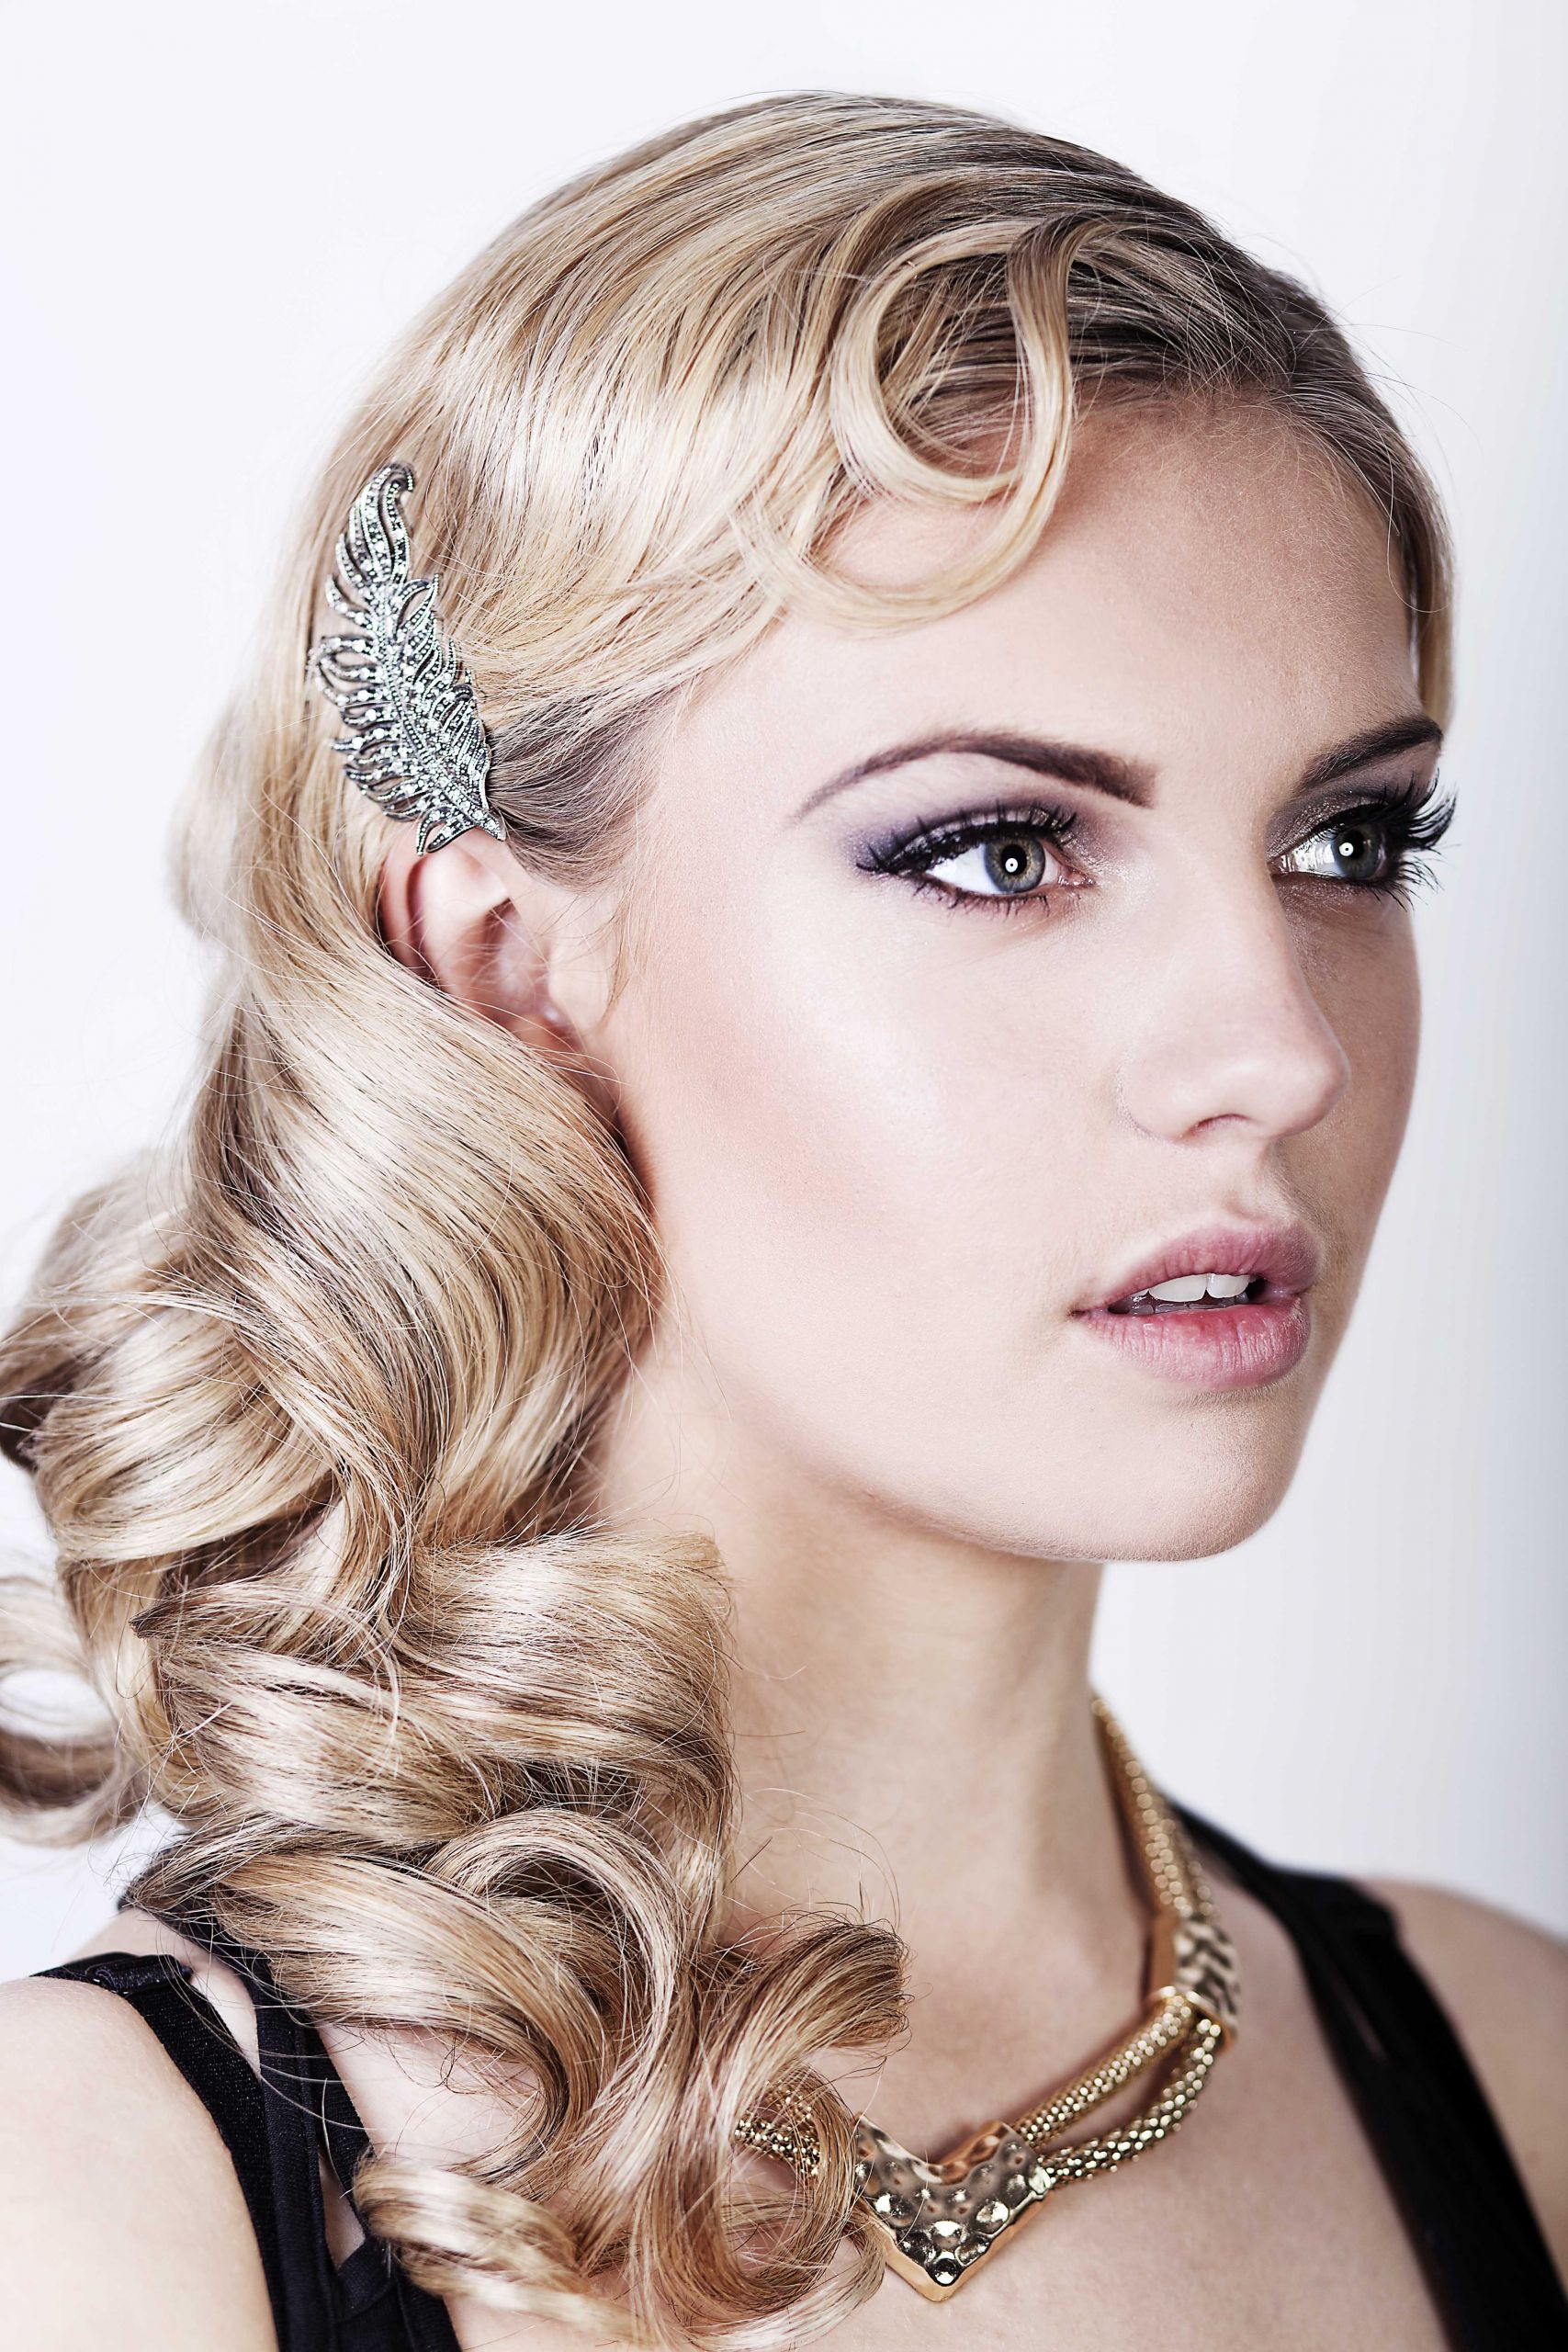 Great Gatsby Hairstyles For Long Hair
 Friday Feature Seriously Great Gatsby 20s inspired hair